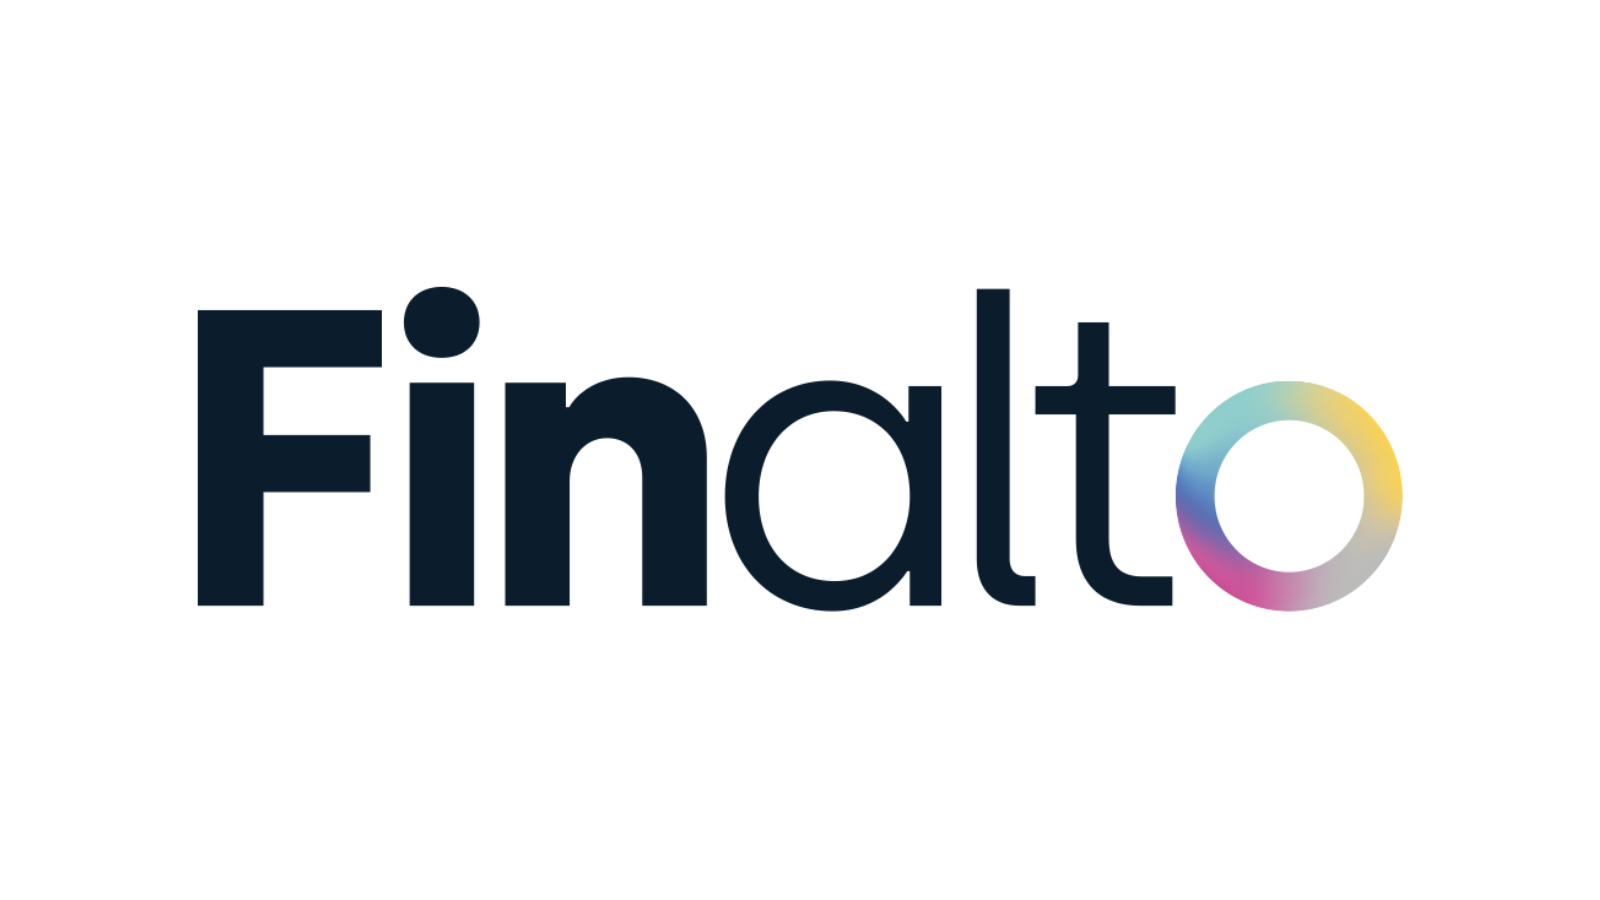 Finalto Adds Soft Commodity Spot Contracts Wheat, Soybean, Corn, and Cocoa